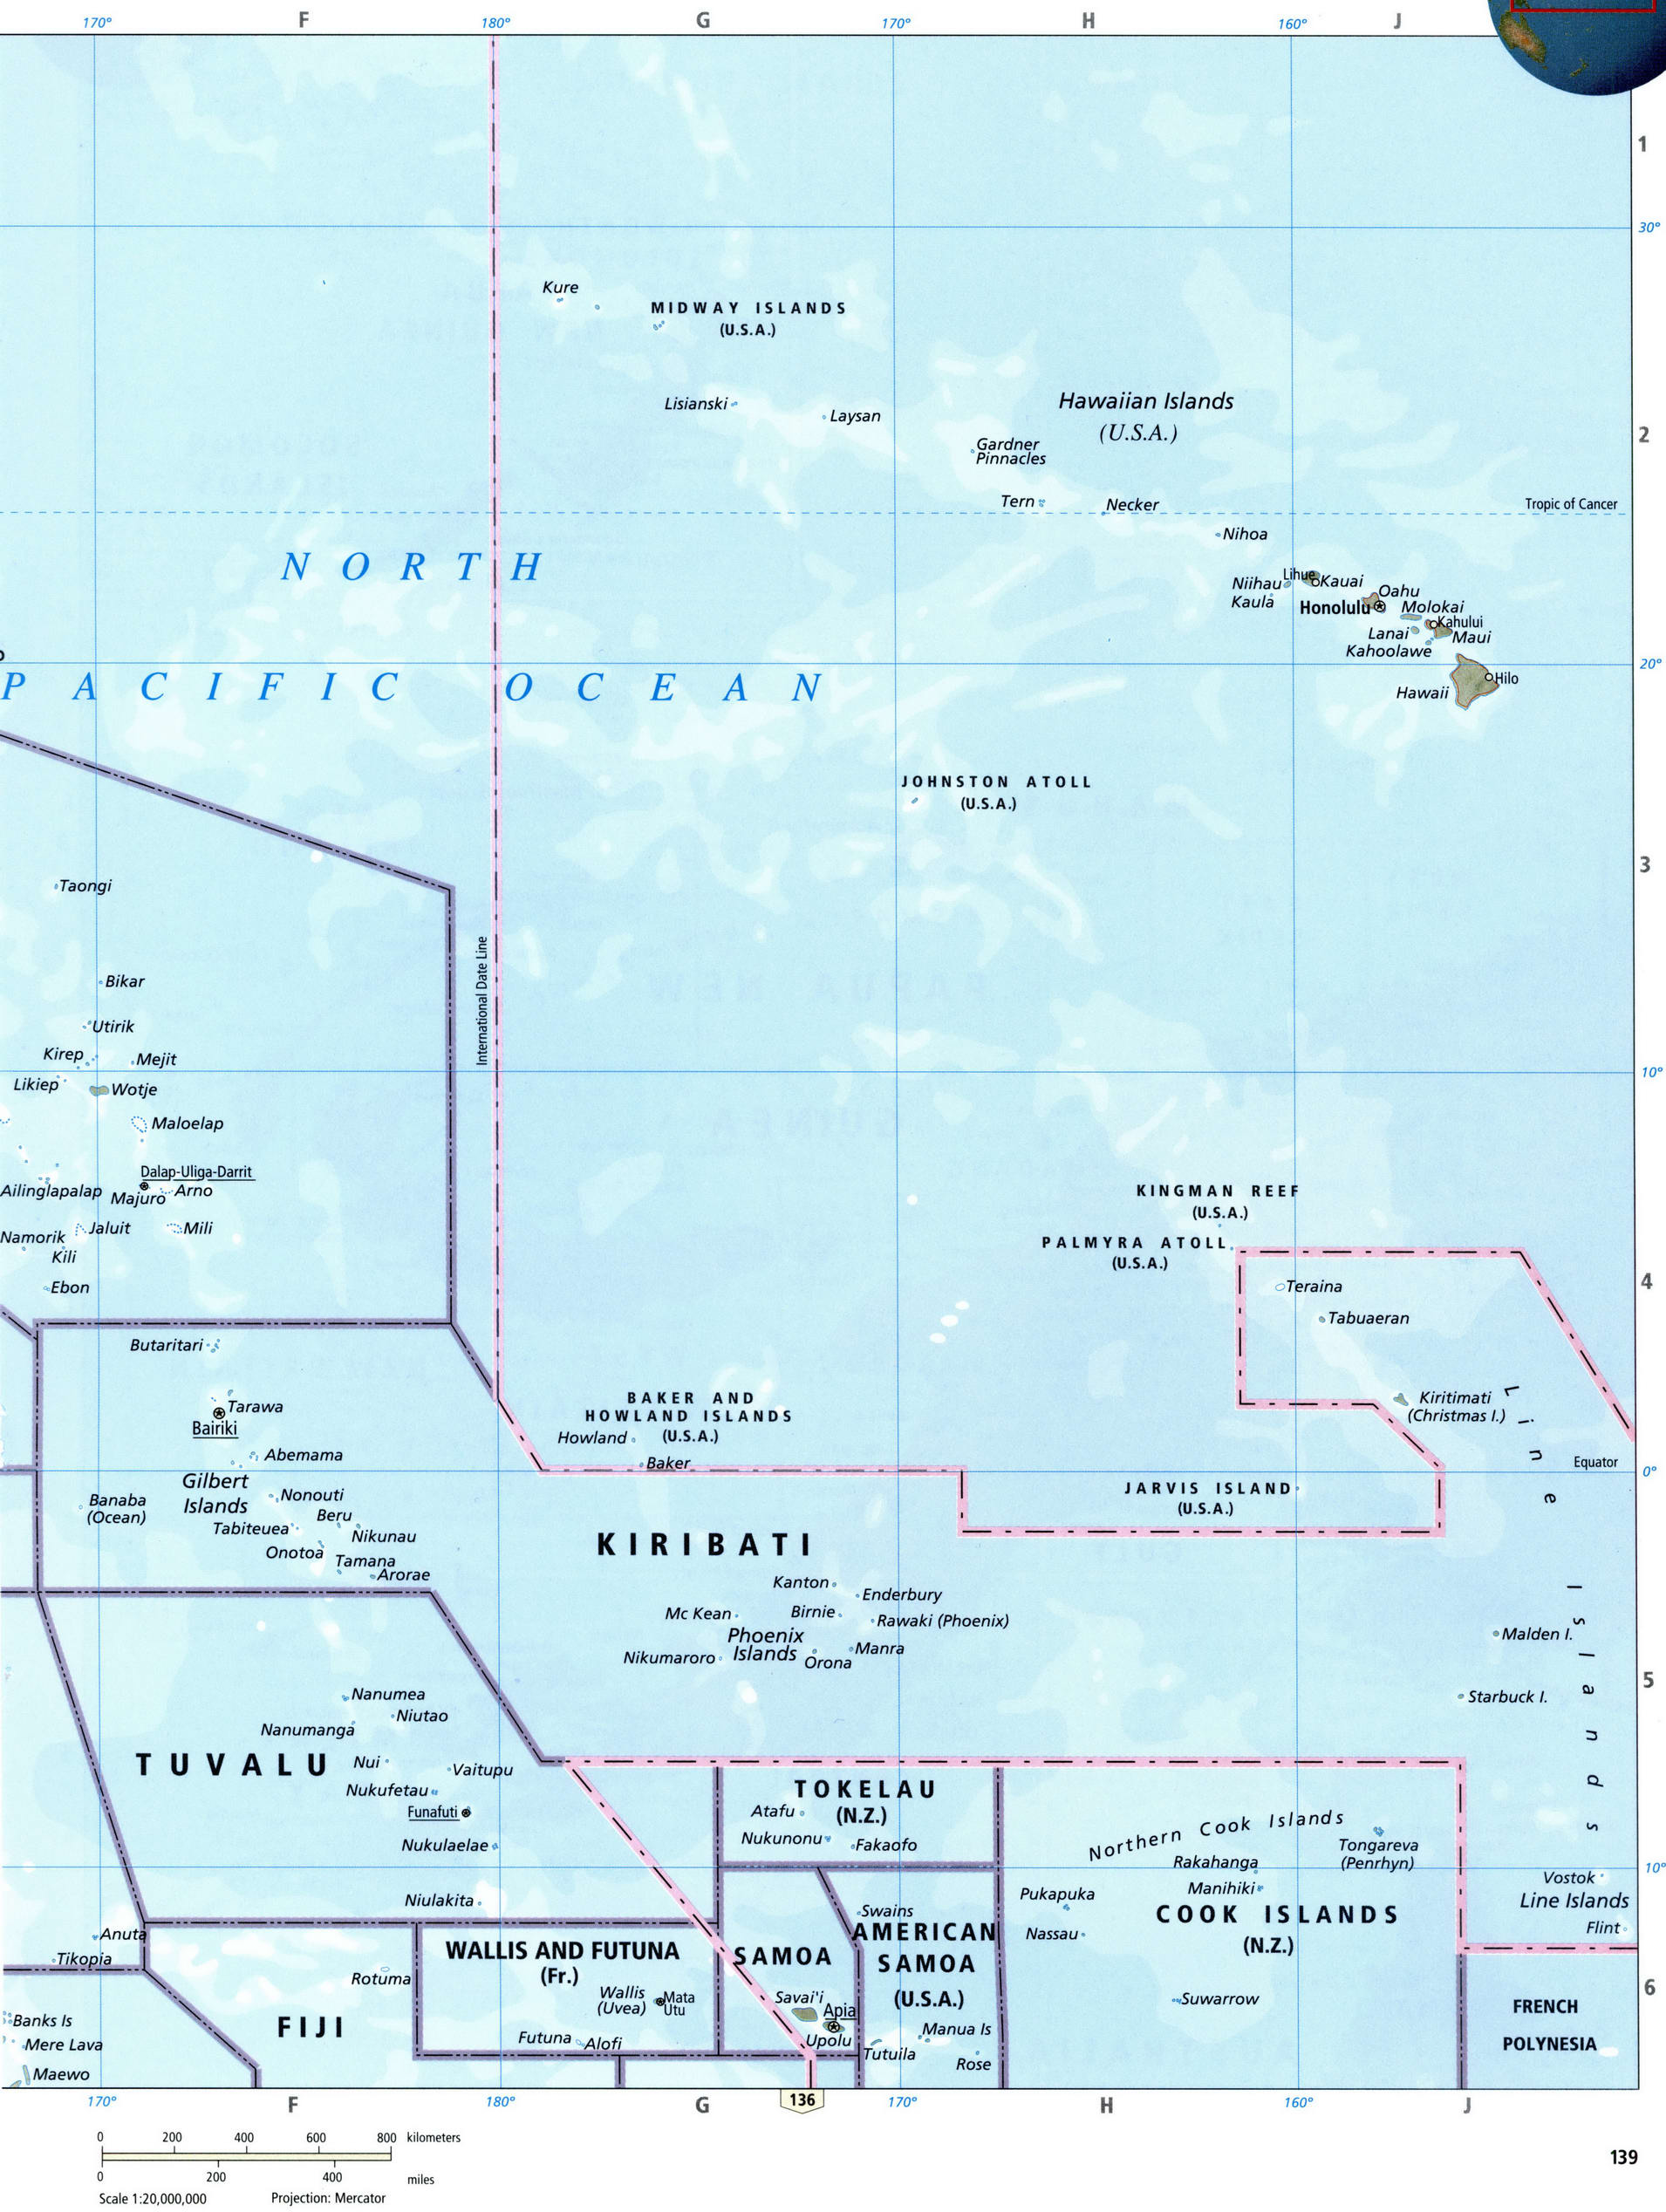 North Pacific ocean detailed map